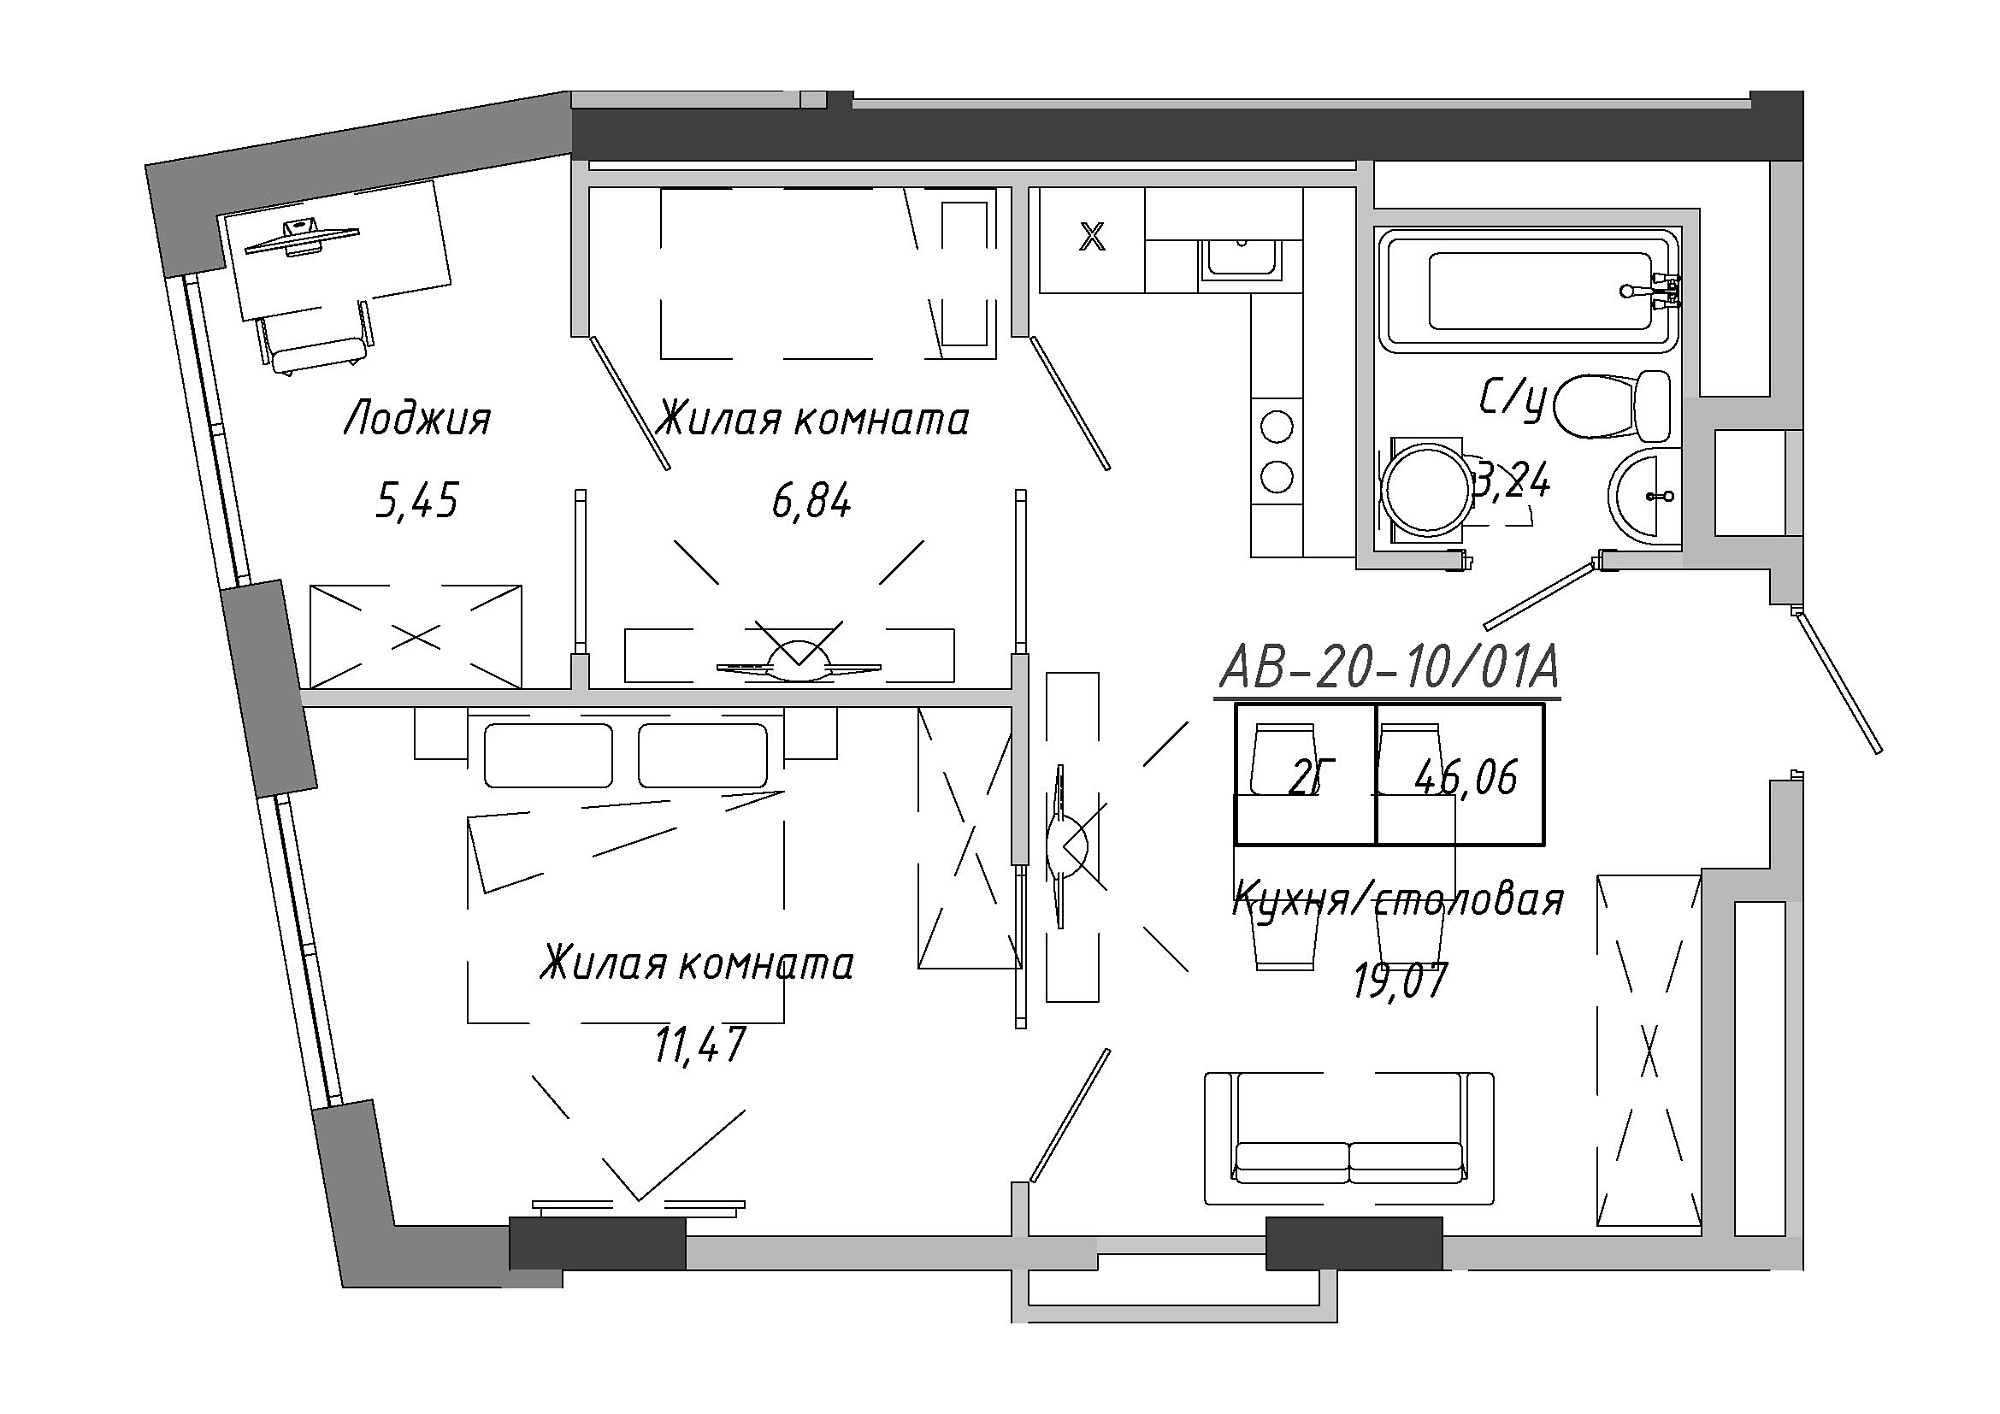 Planning 2-rm flats area 45.99m2, AB-20-10/0001а.